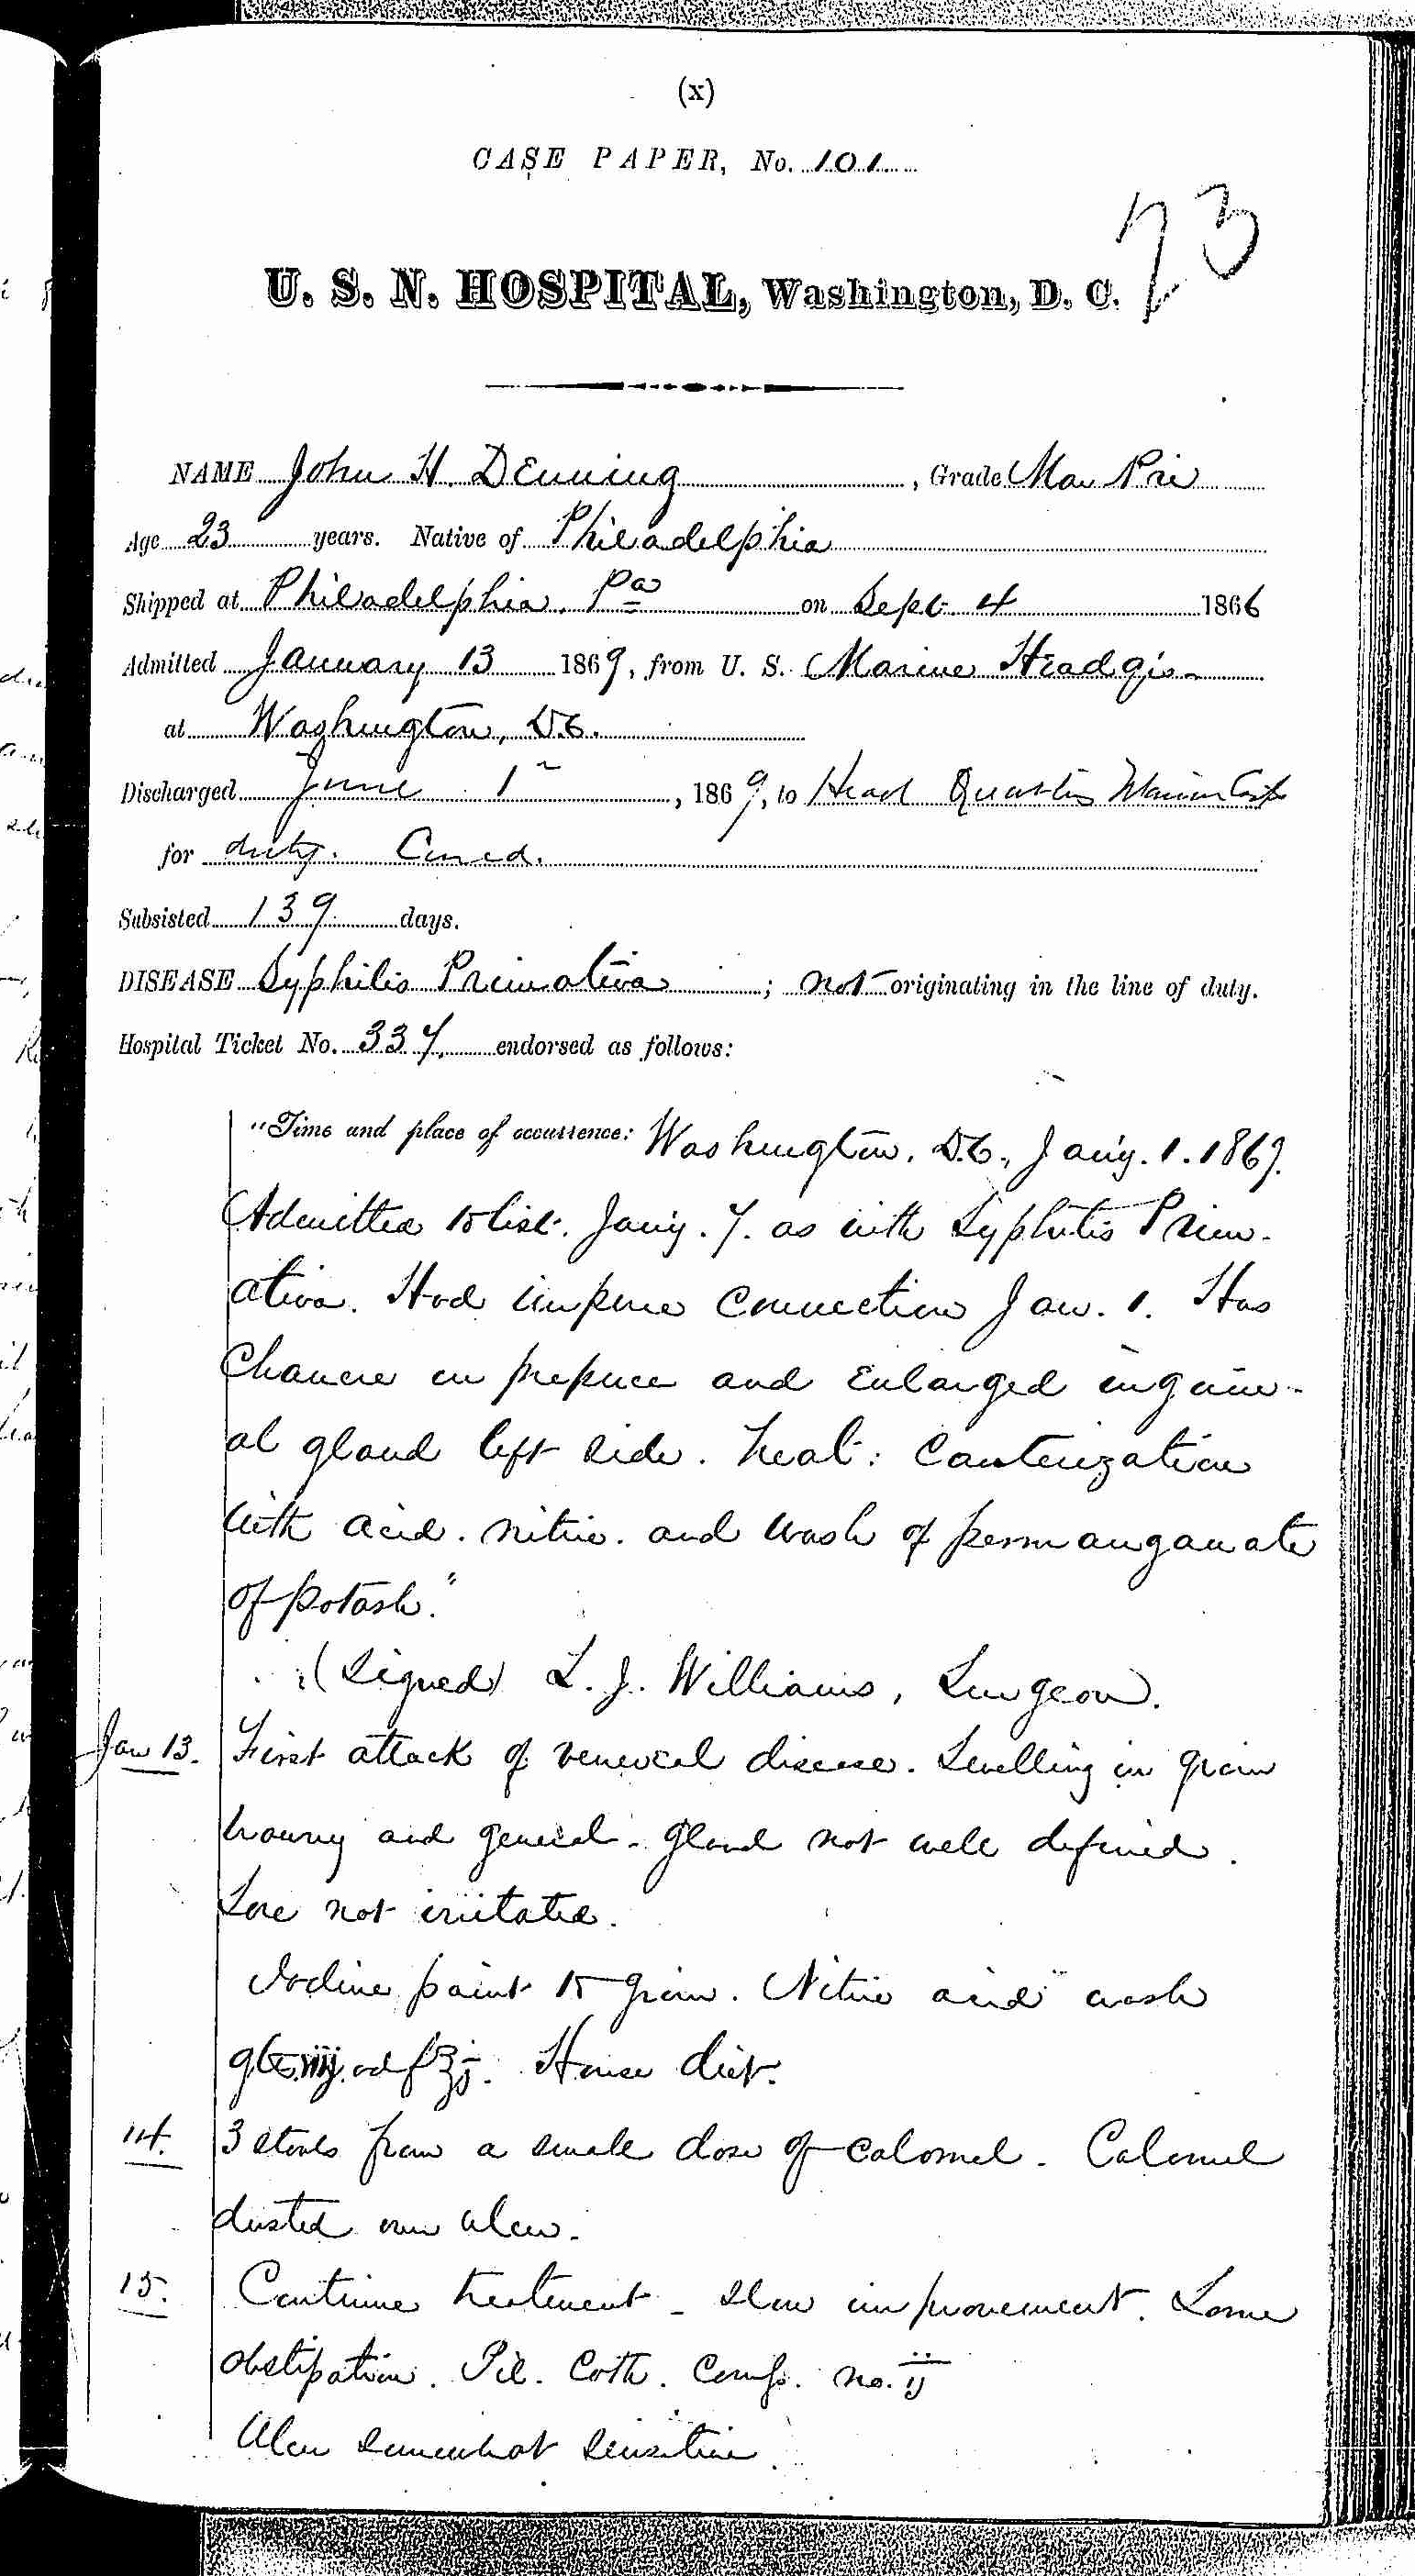 Entry for John H. Denning (first admission page 1 of 9) in the log Hospital Tickets and Case Papers - Naval Hospital - Washington, D.C. - 1868-69